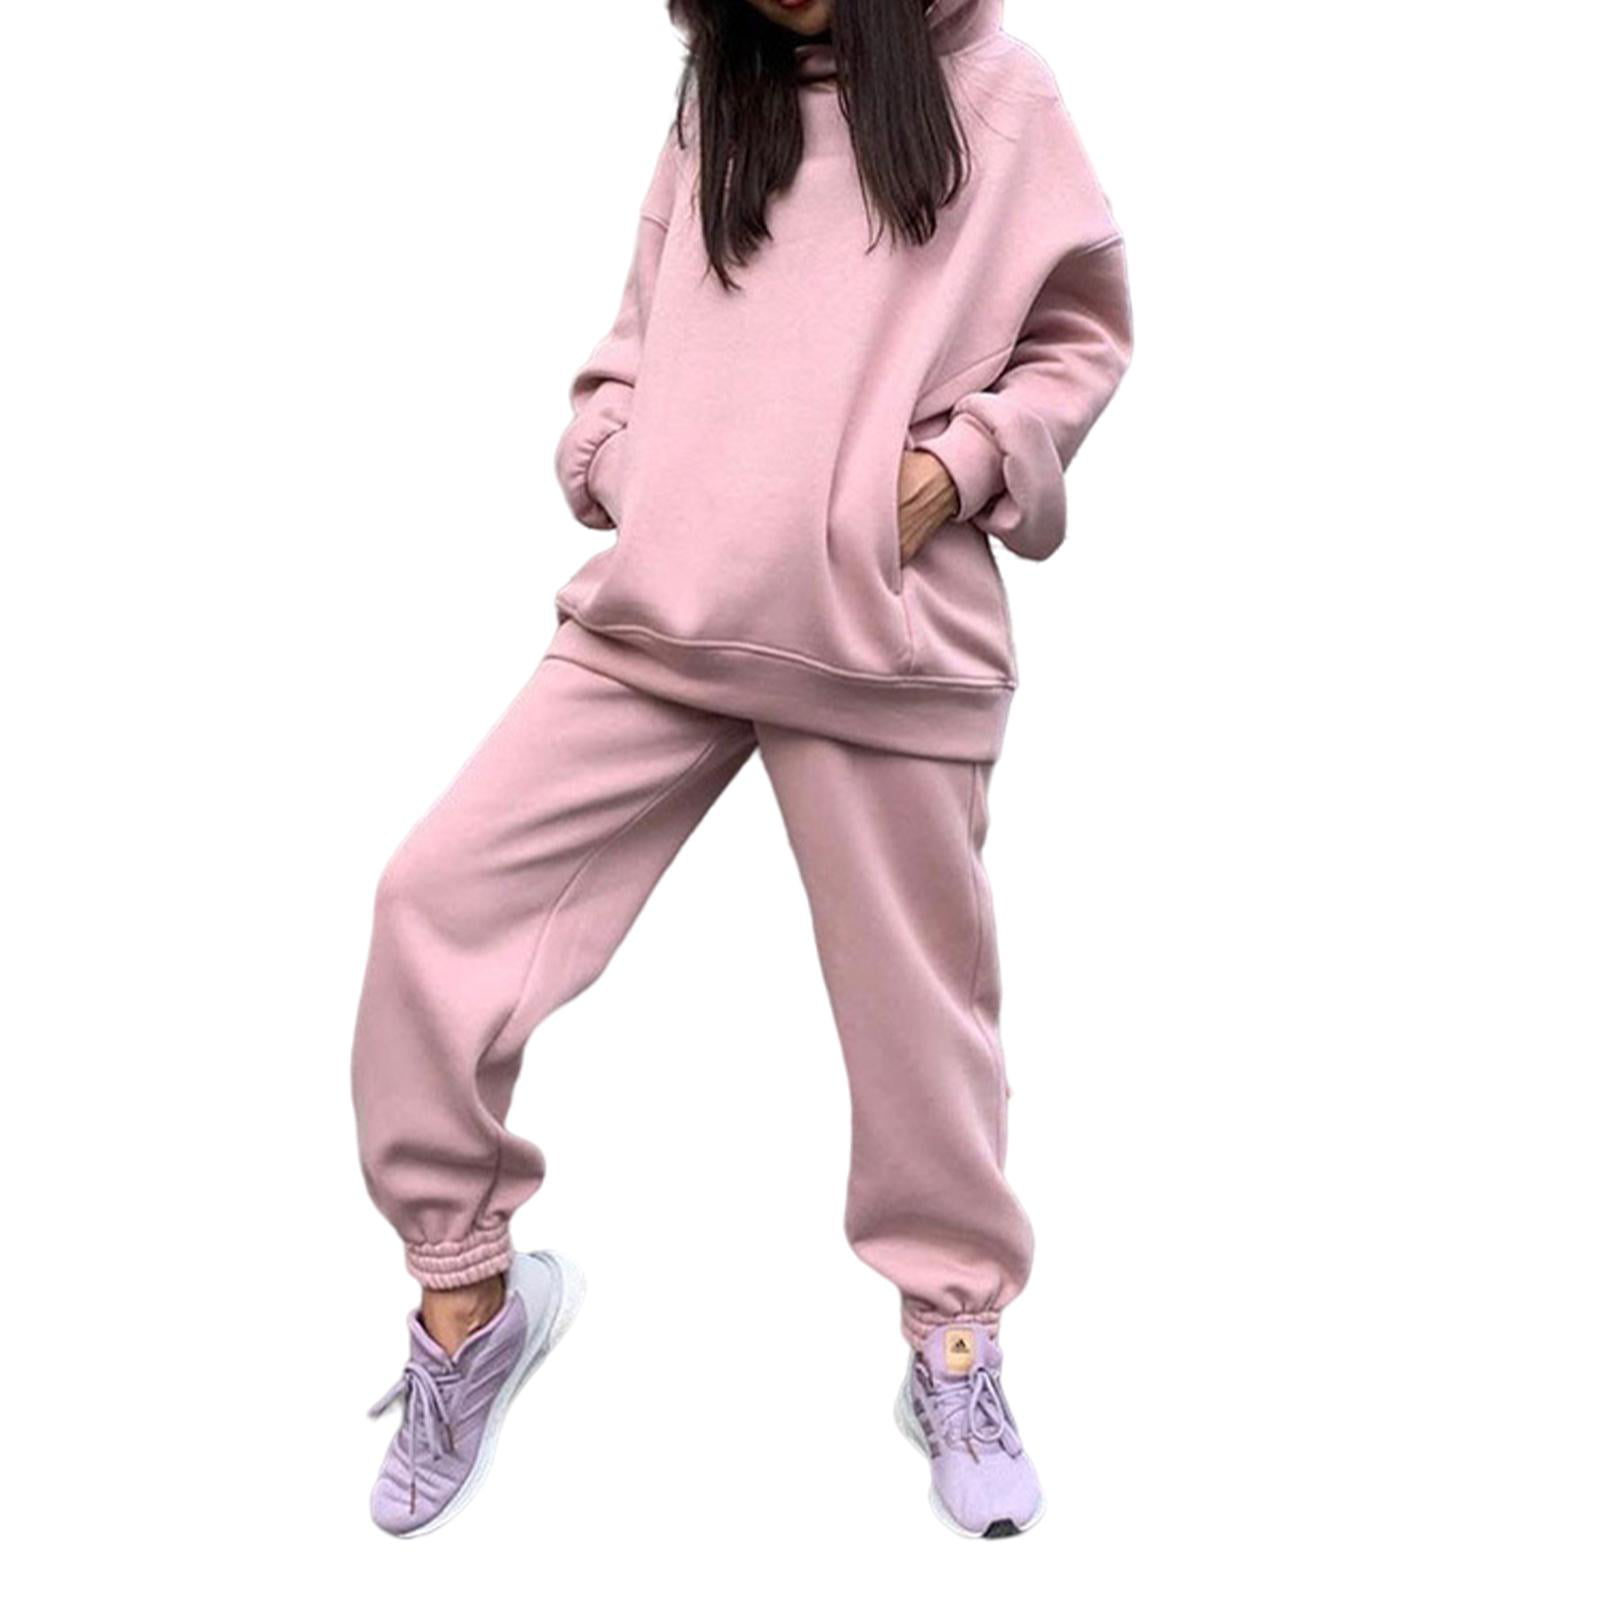 Tracksuit Two Piece Gym Set Women Clothing Female Sexy Outfit Sweatshirt  Sweatpants Jogging Sportswear Suit K20S10986 210712 From 12,79 €